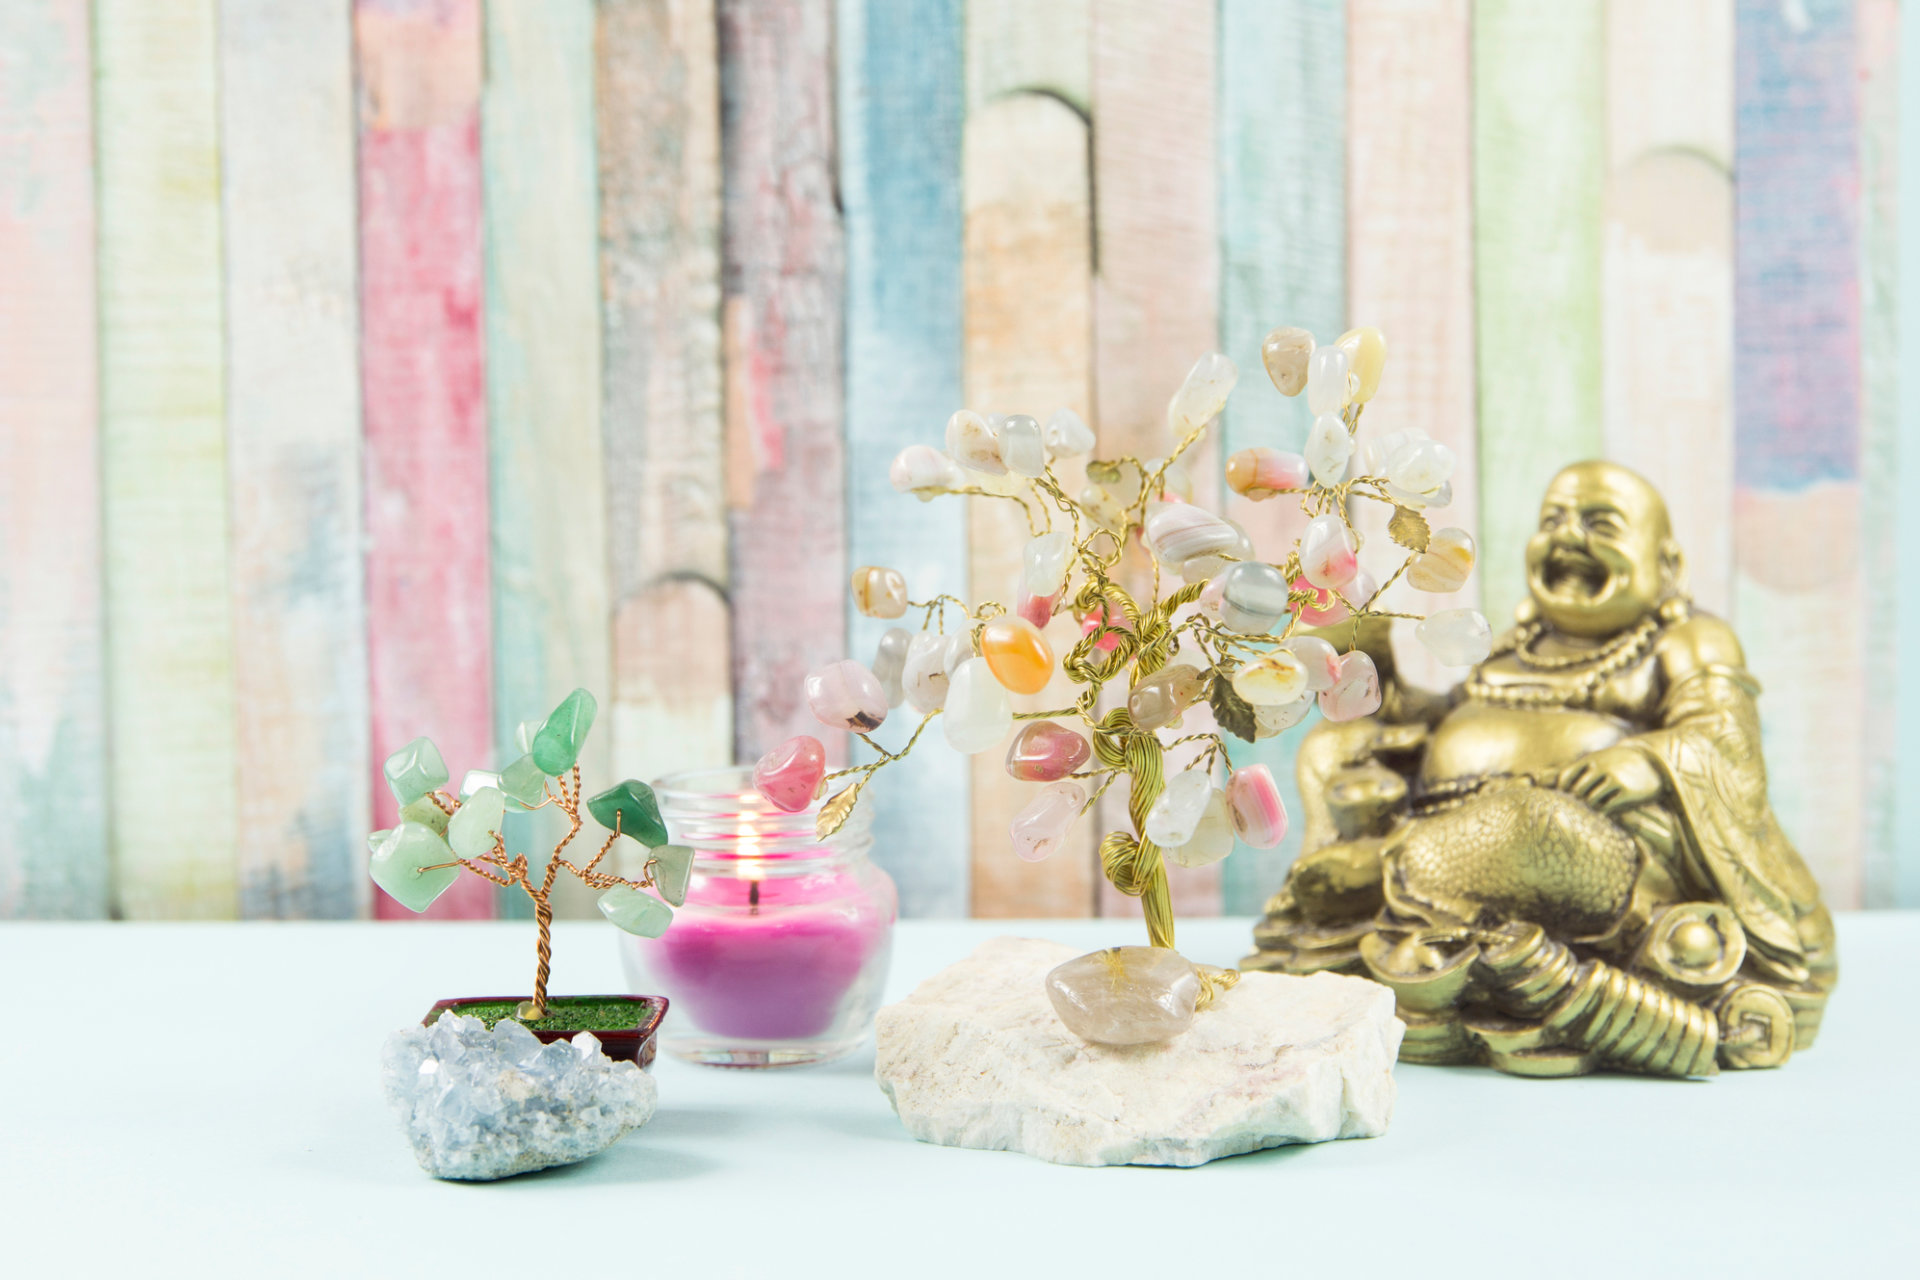 Understanding Feng Shui's Meaning and Purpose